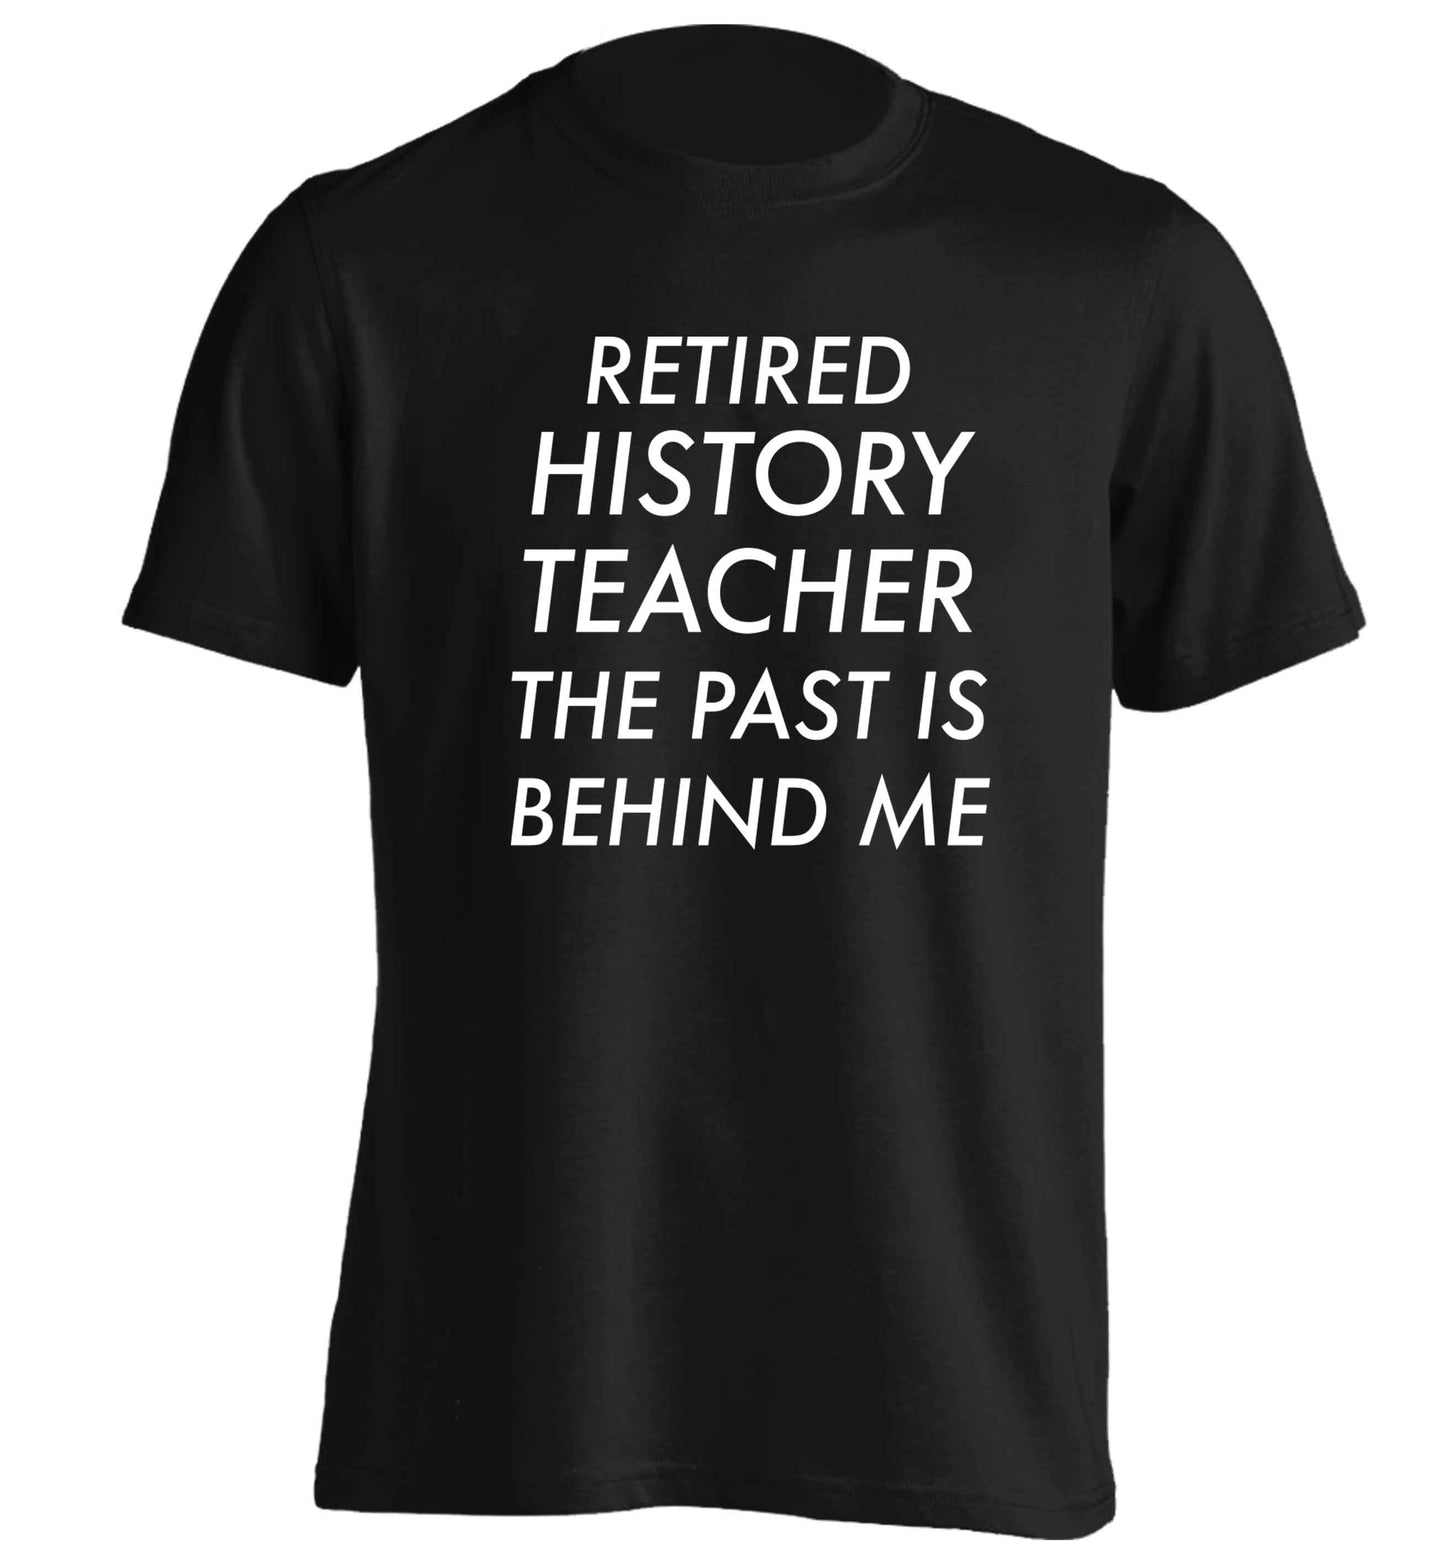 Retired history teacher the past is behind me adults unisex black Tshirt 2XL